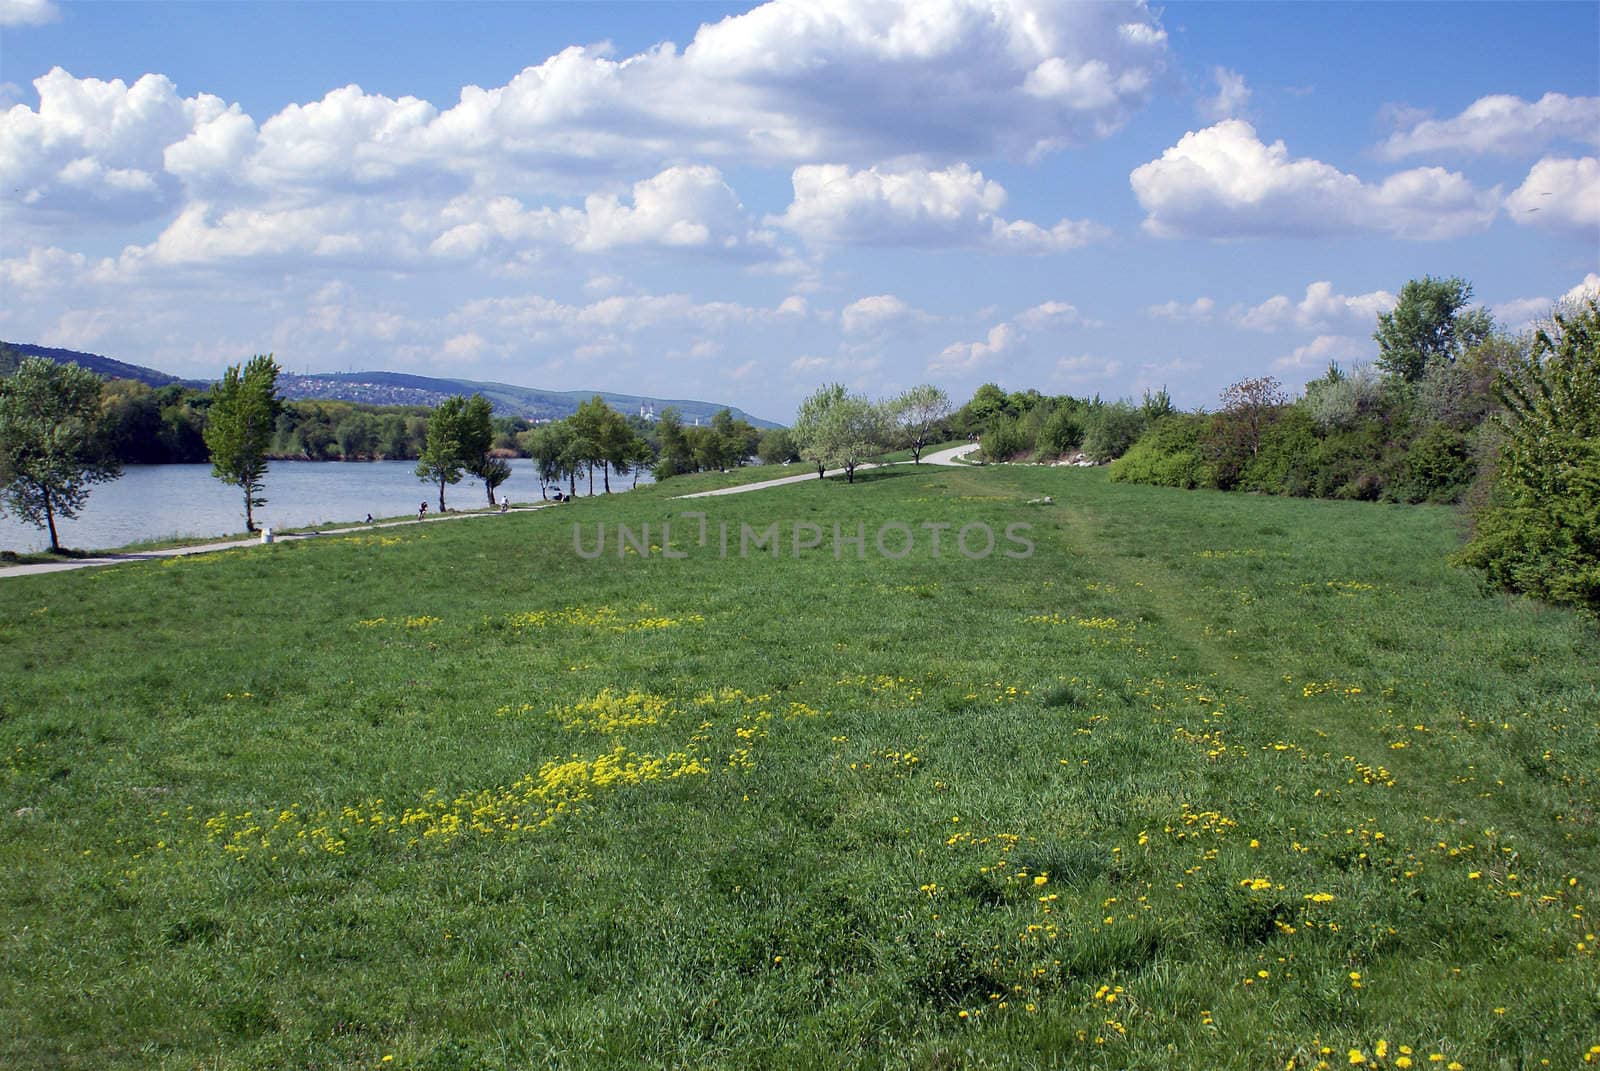 View of the famous Danube Island (Donauinsel) in Vienna.